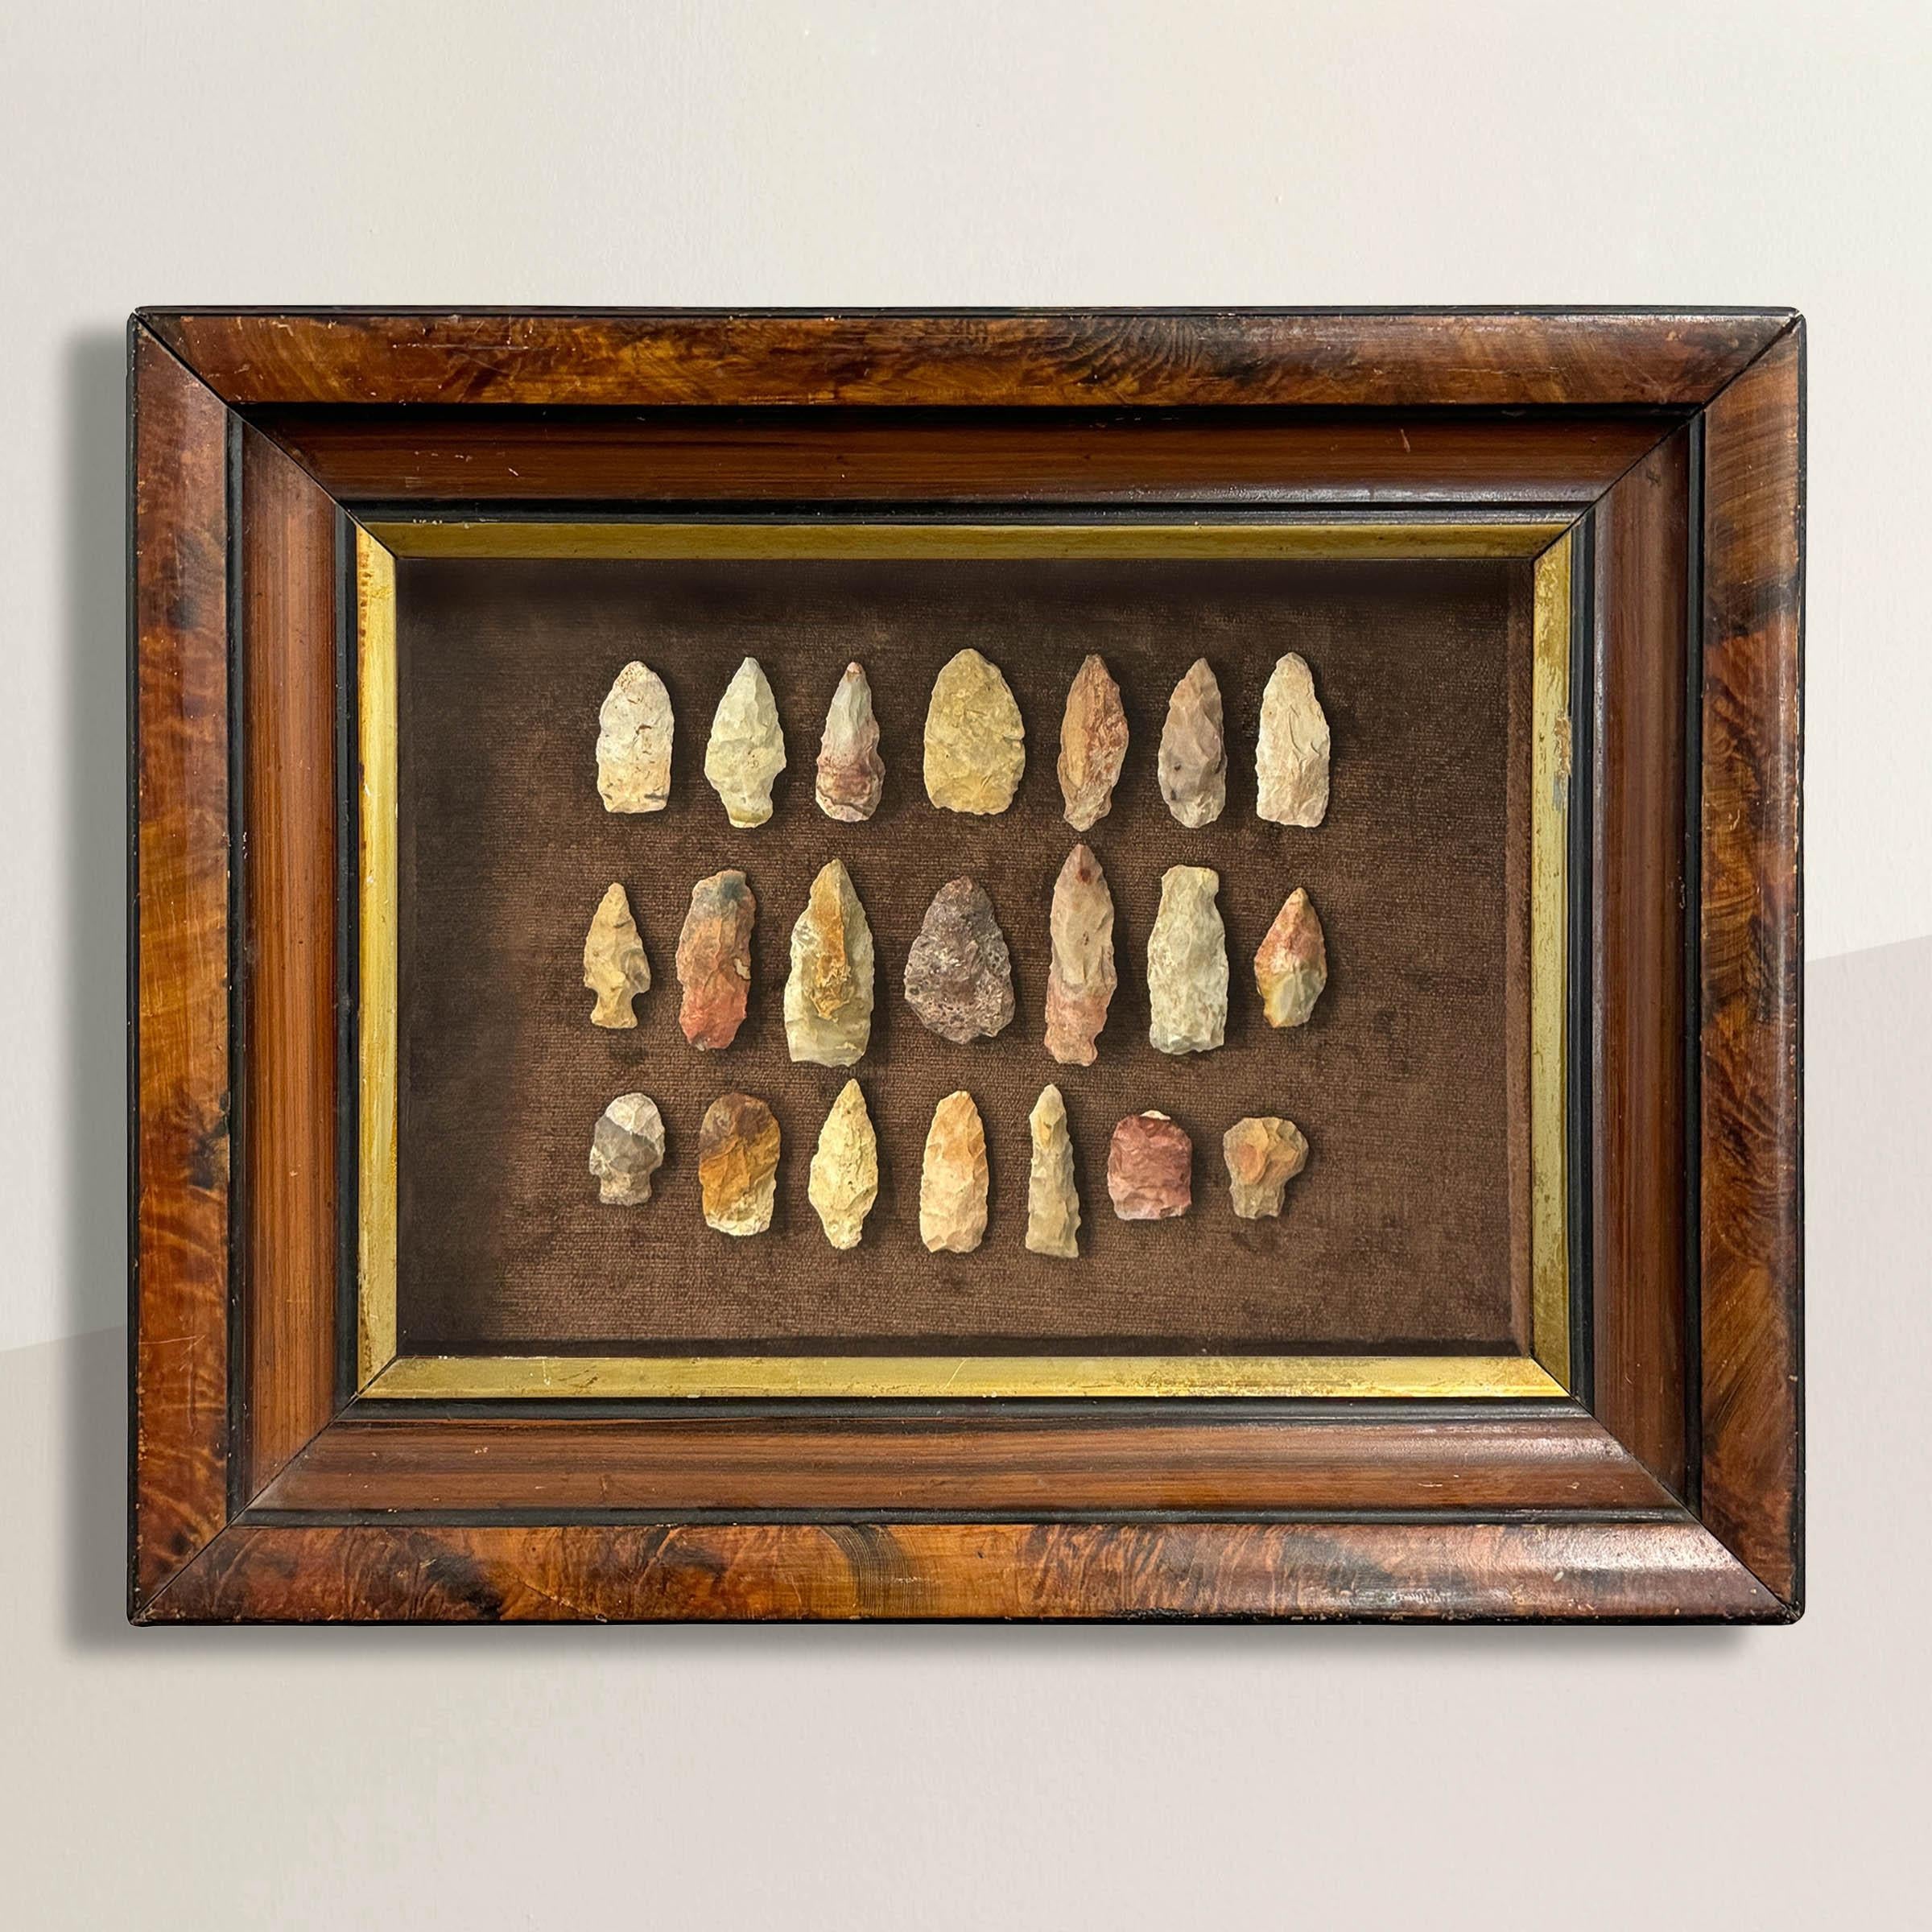 An exceptional set of twenty-one stone arrowheads, discovered in Wisconsin's Waukesha County and framed within a 19th-century faux grain painted shadowbox, these arrowheads not only capture the beauty of their craftsmanship but also preserve their